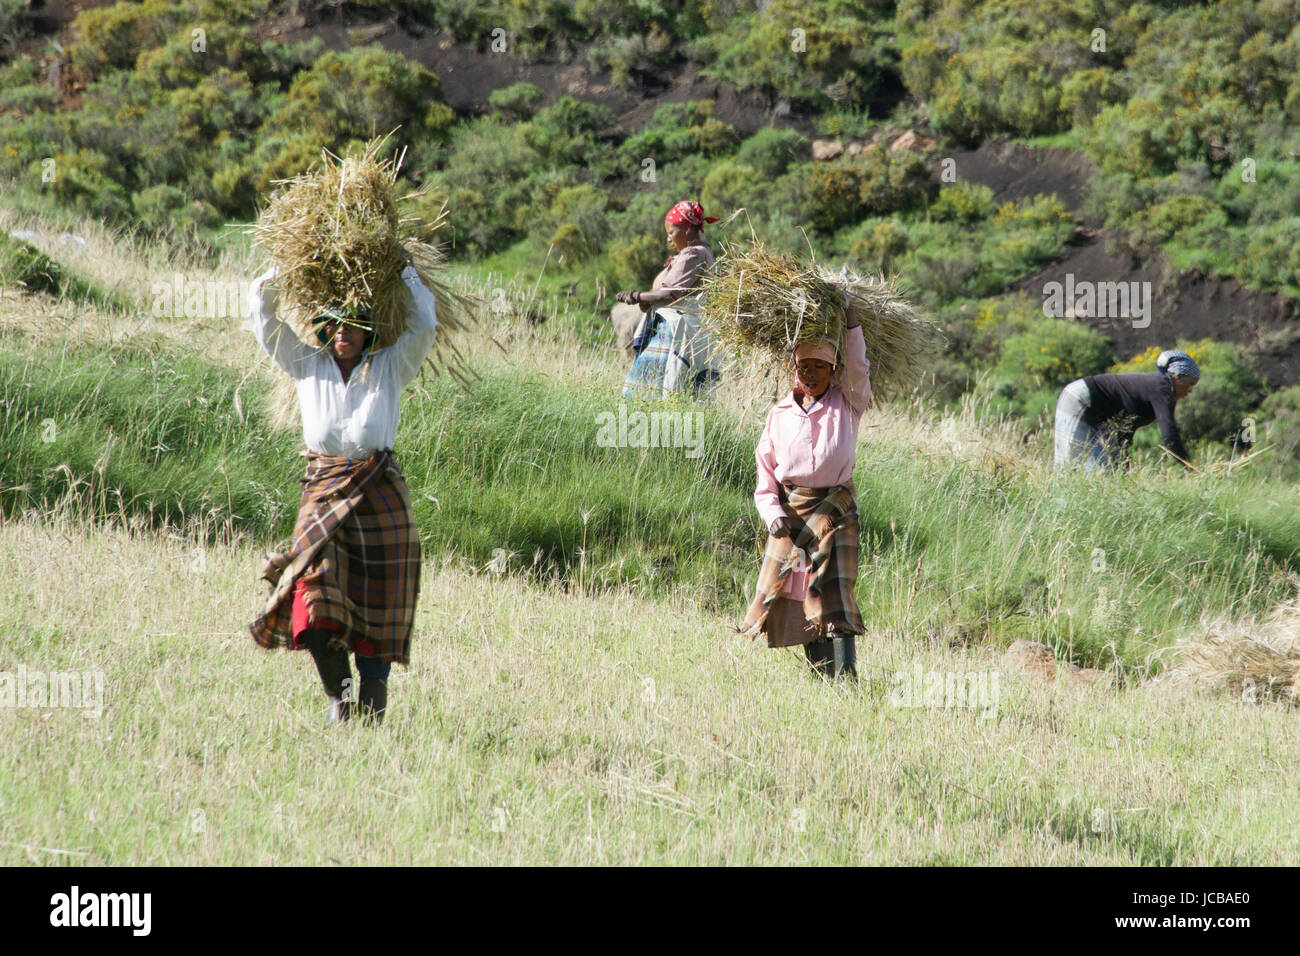 Women carrying wheat bundles Central Highlands Lesotho Southern Africa Stock Photo